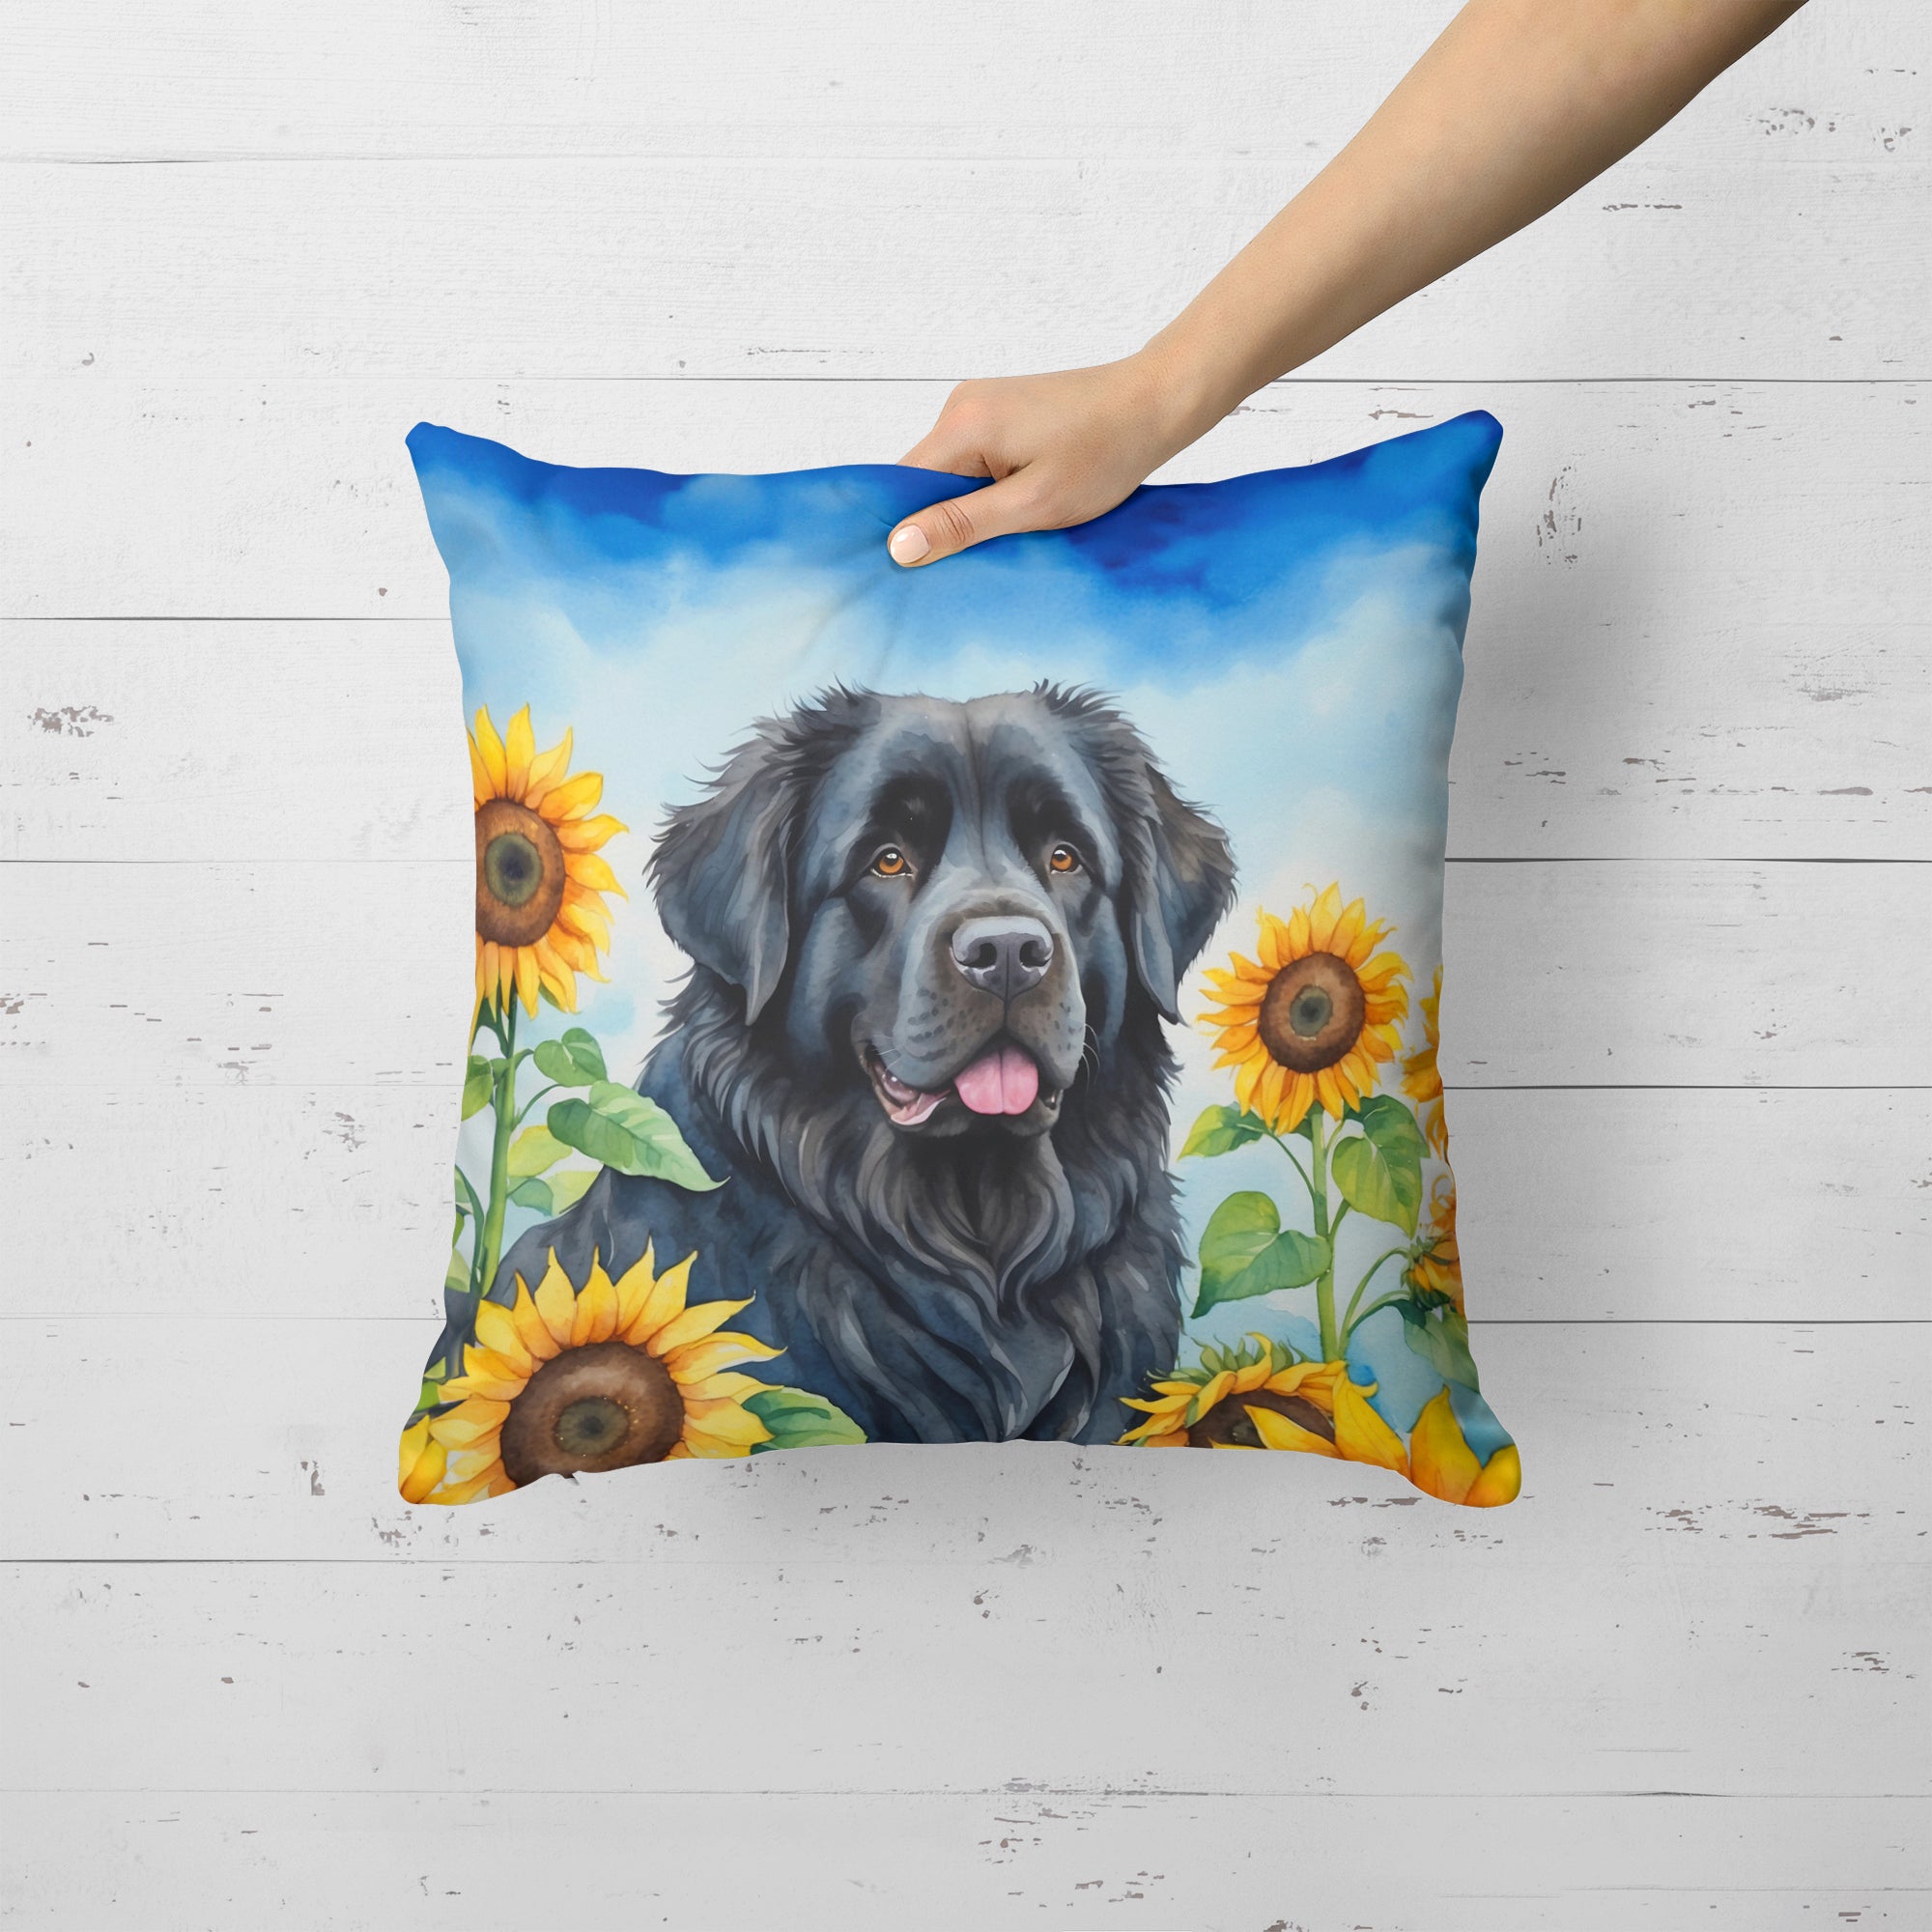 Buy this Newfoundland in Sunflowers Throw Pillow